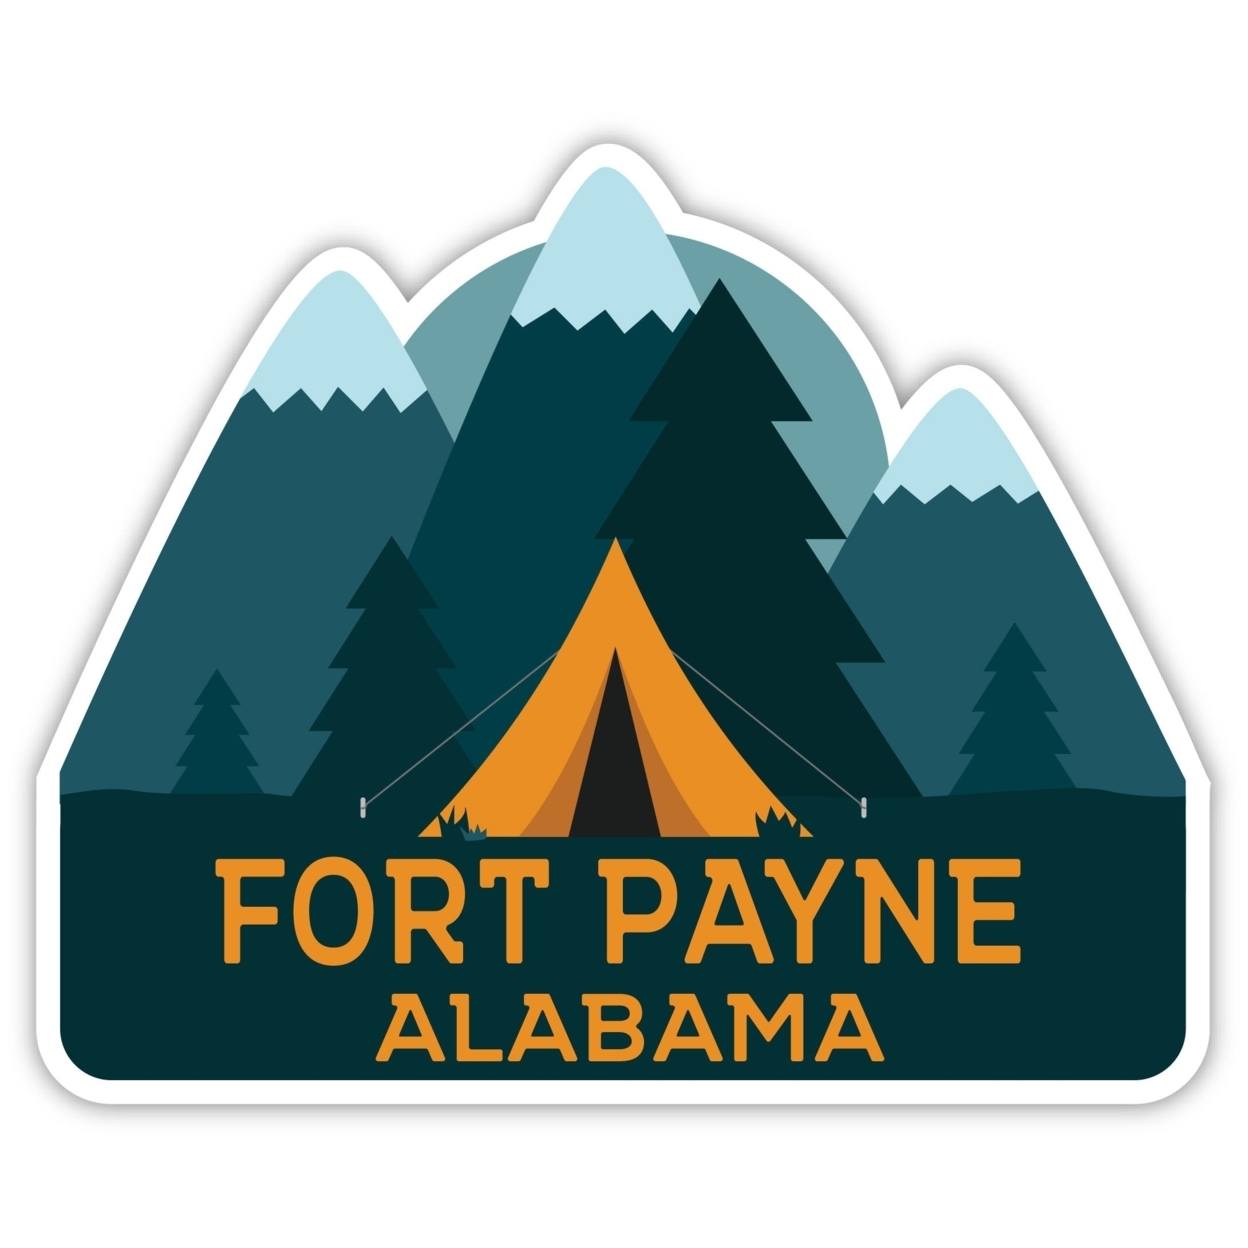 Fort Payne Alabama Souvenir Decorative Stickers (Choose Theme And Size) - 4-Pack, 4-Inch, Adventures Awaits